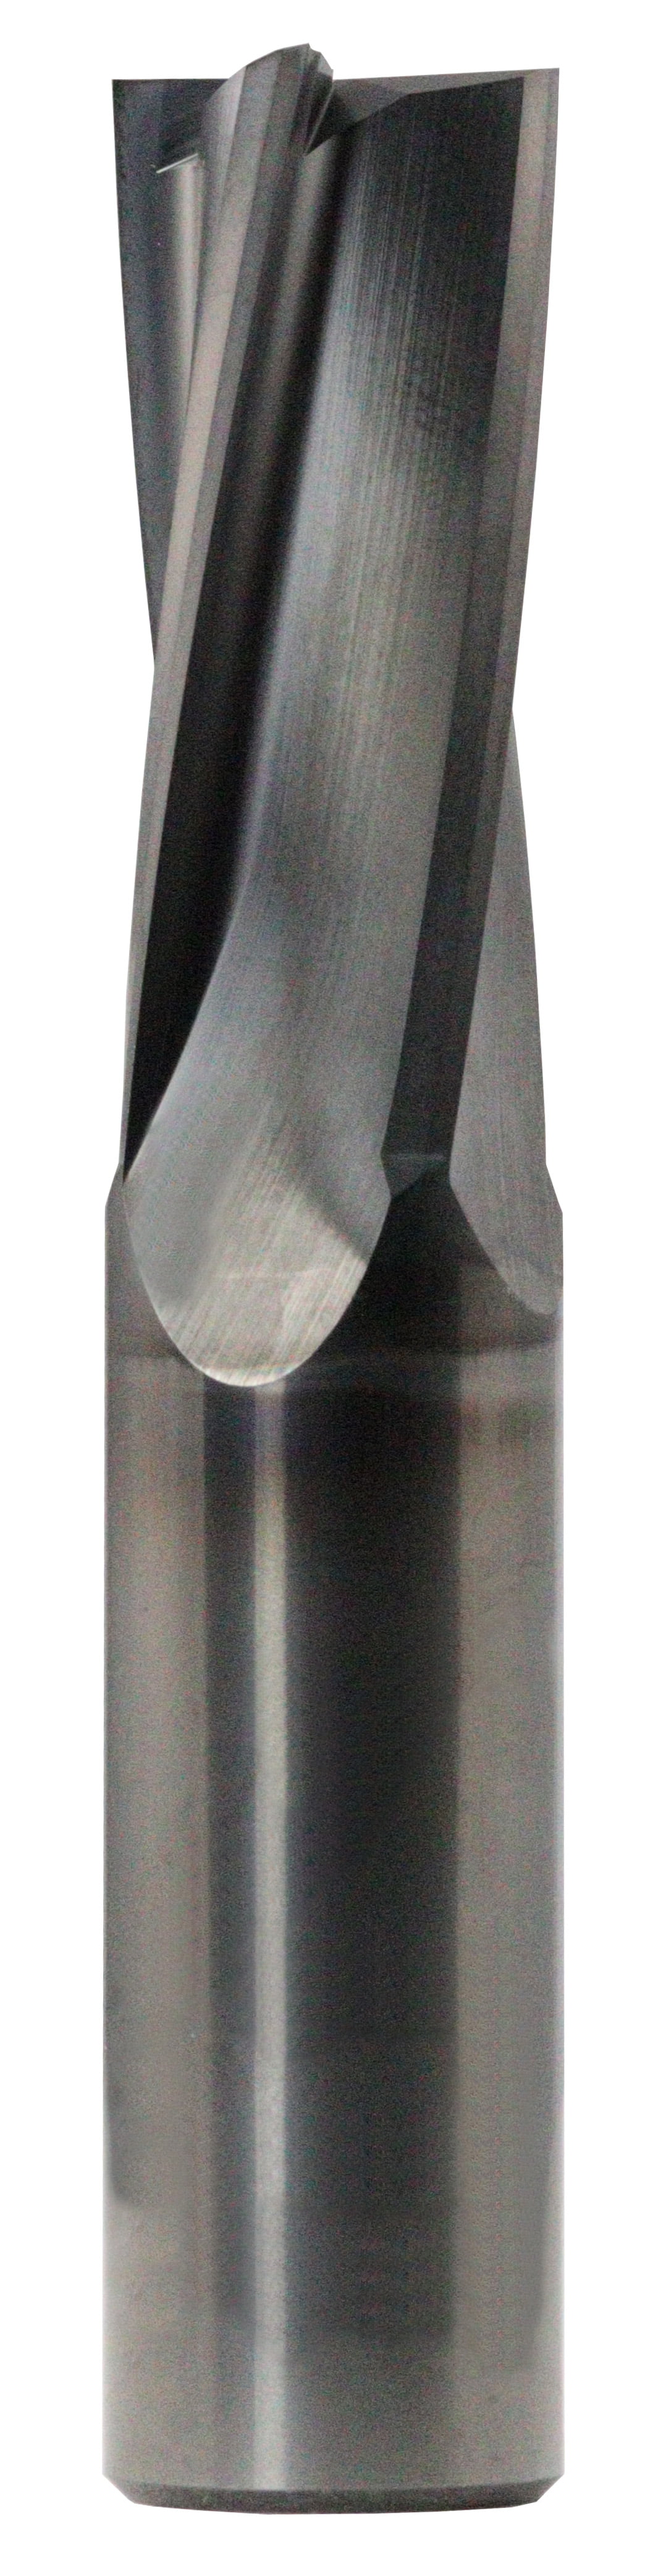 1/4" Dia, 4 Flute, Square End End Mill - 72979